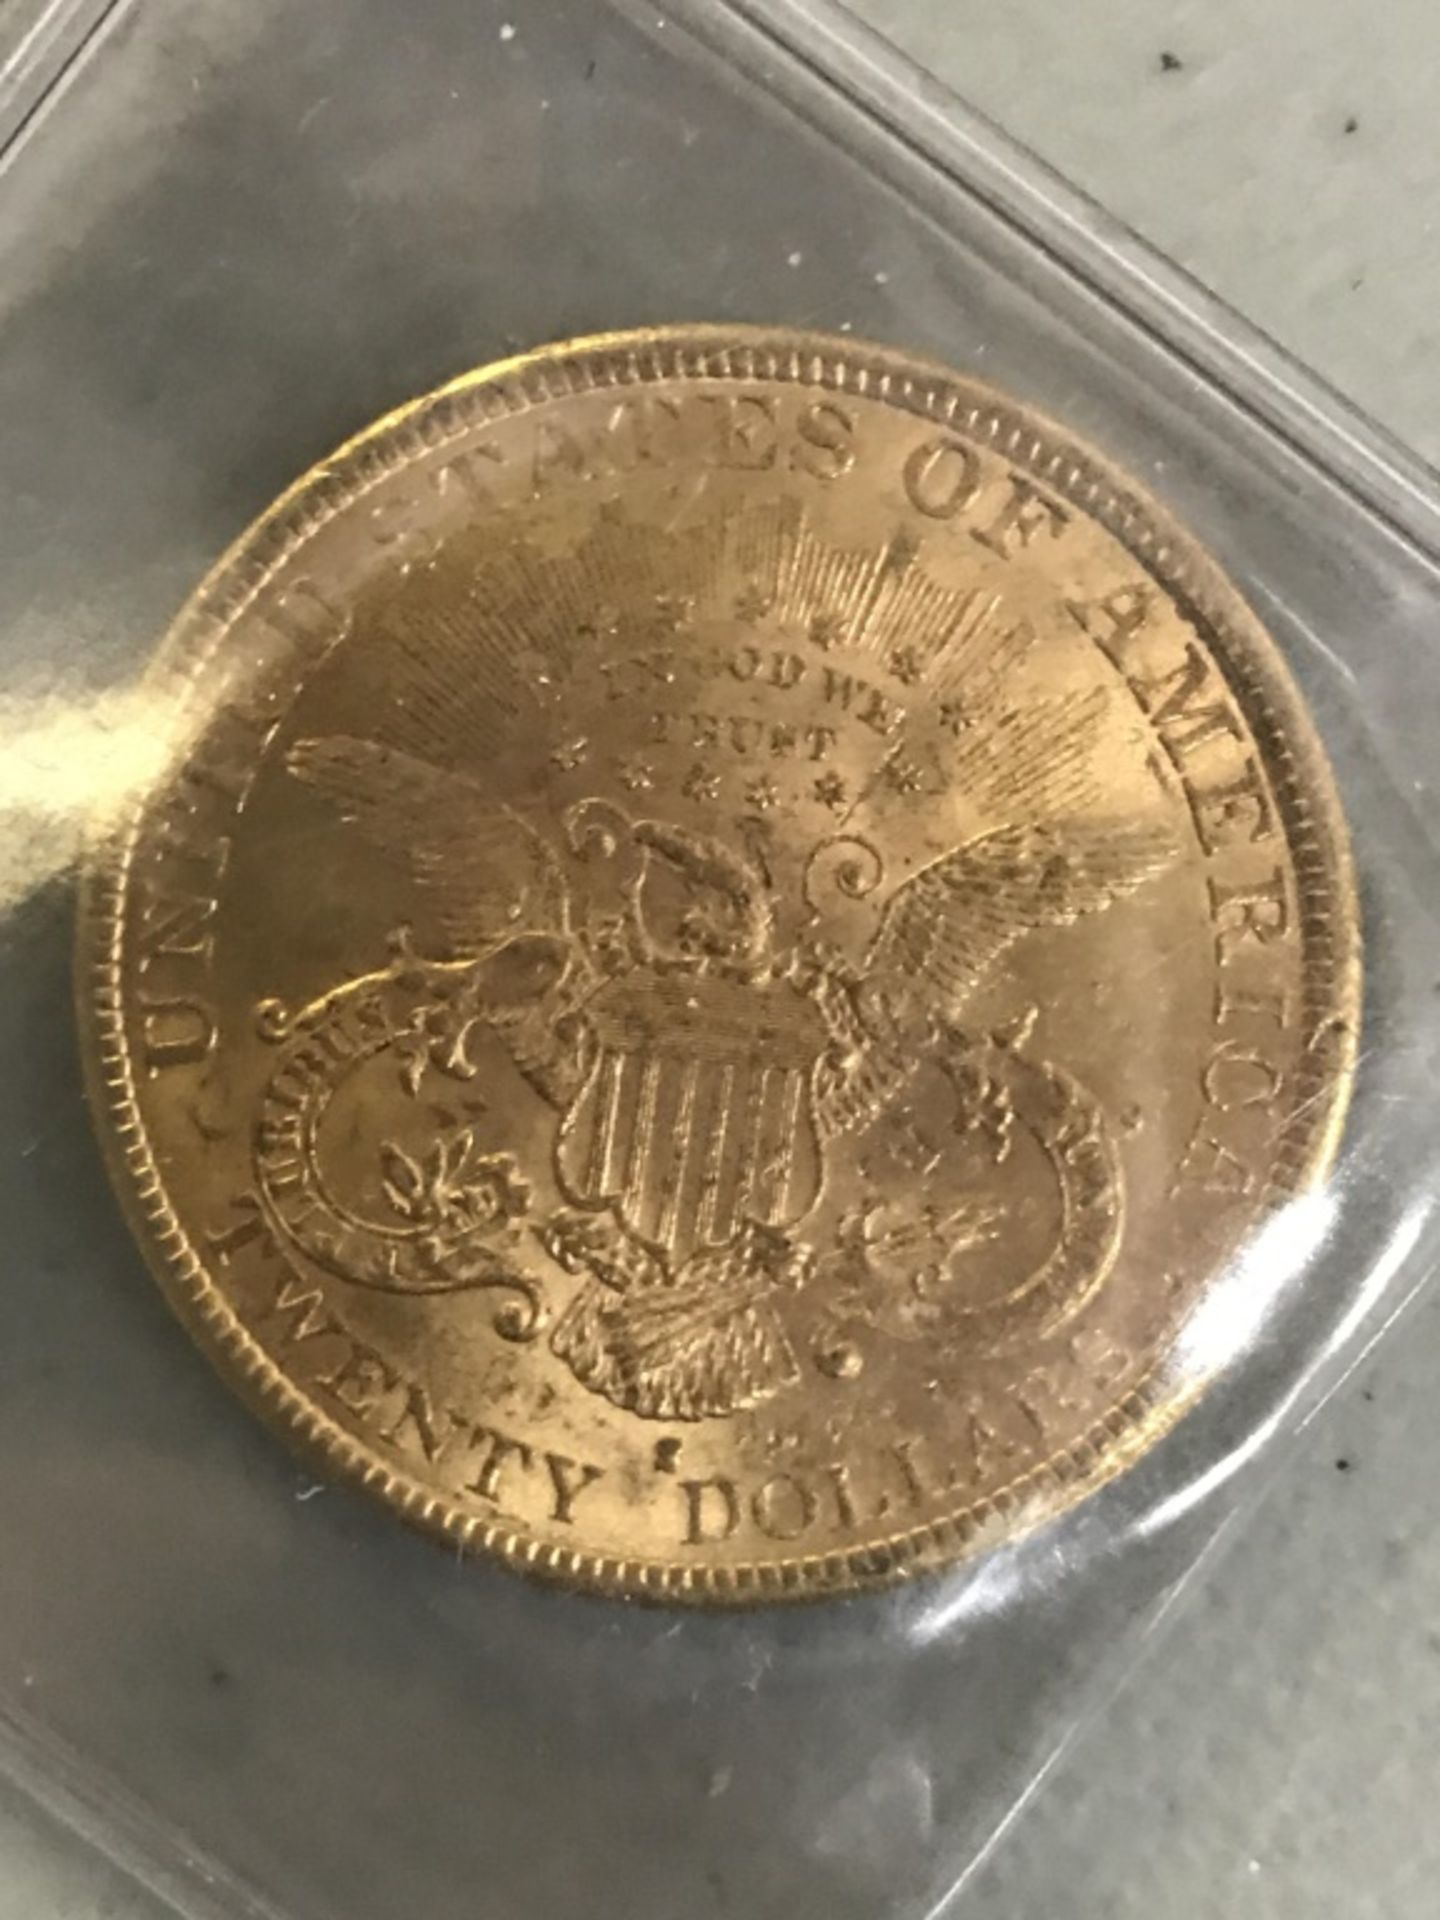 $20 Us Gold 1892 Coin - Image 8 of 9